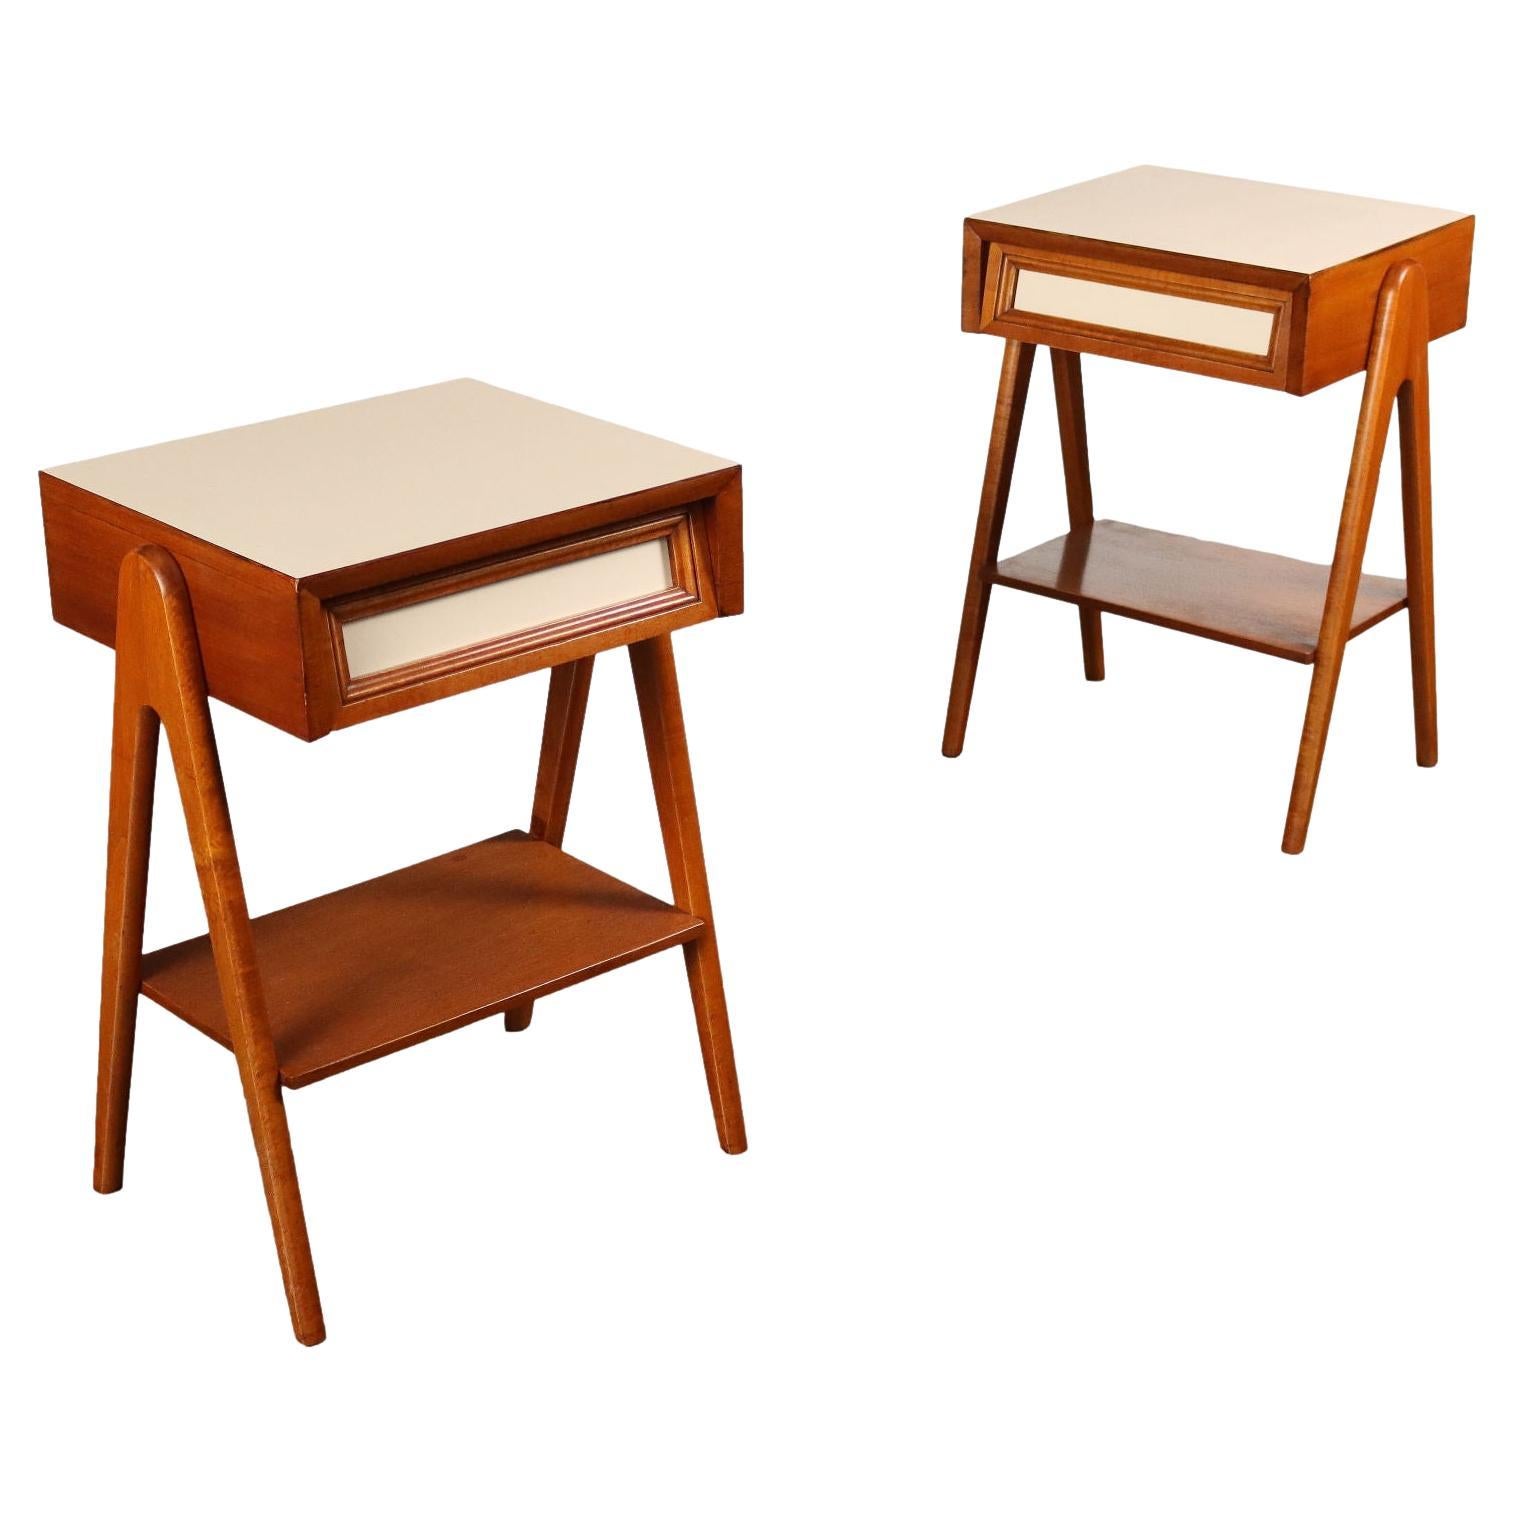 Pair of Bedside Tables Beech Laminate Italy, 1950s